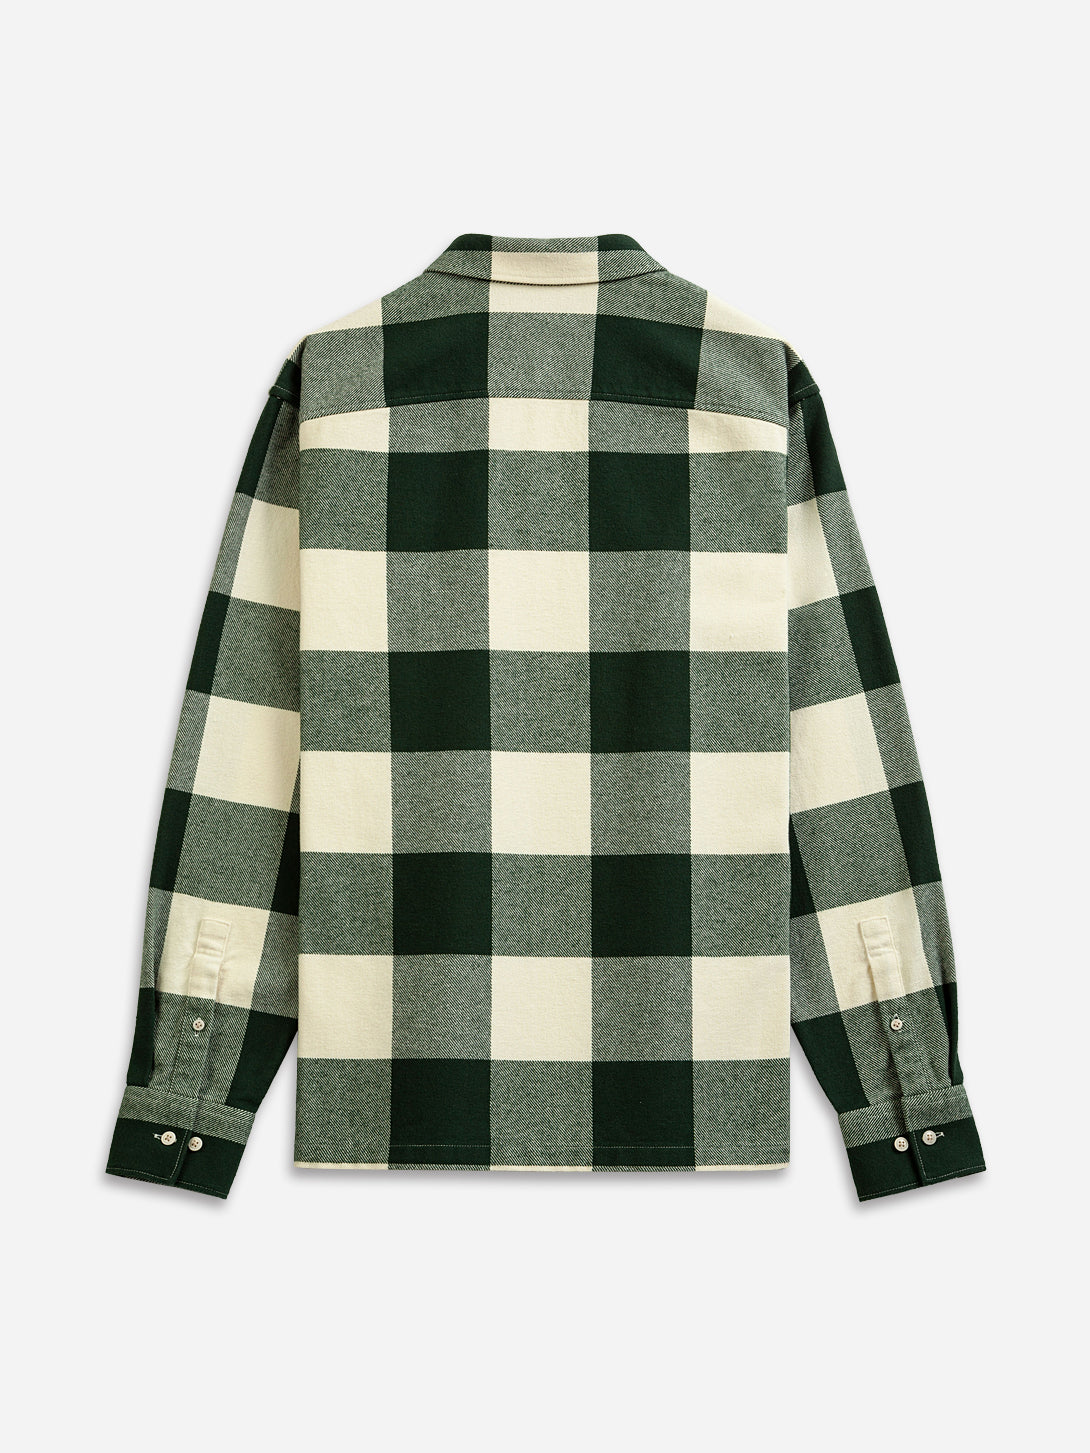 Green/Off White Check Vance Checkered Flannel Mens Button Up Shirt